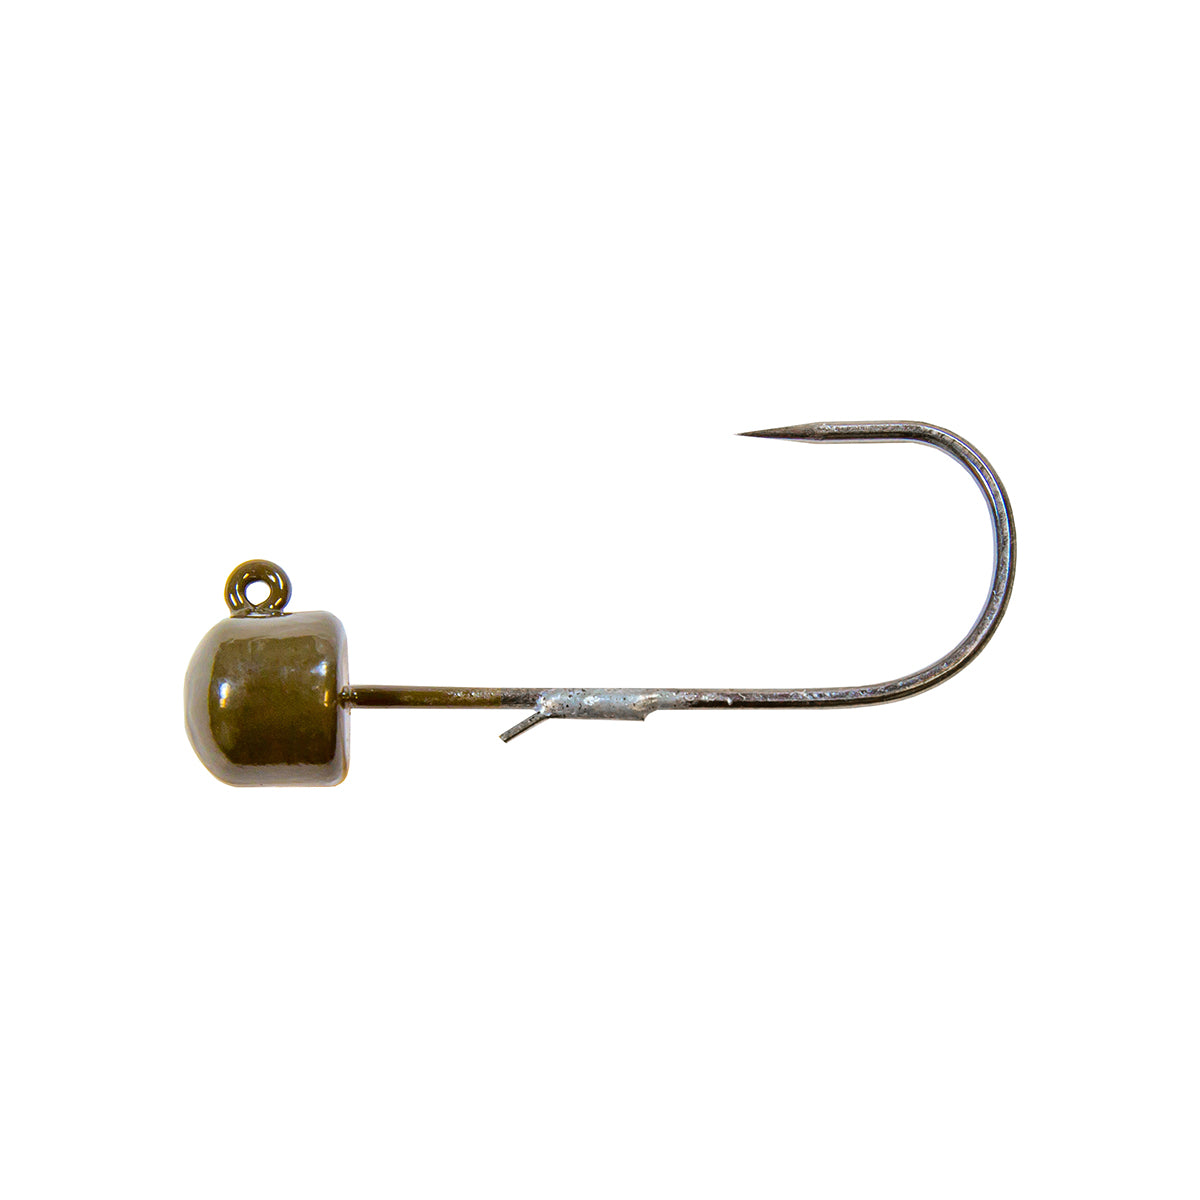 Z-MAN POWER FINESSE SHROOMZ - Copperstate Tackle